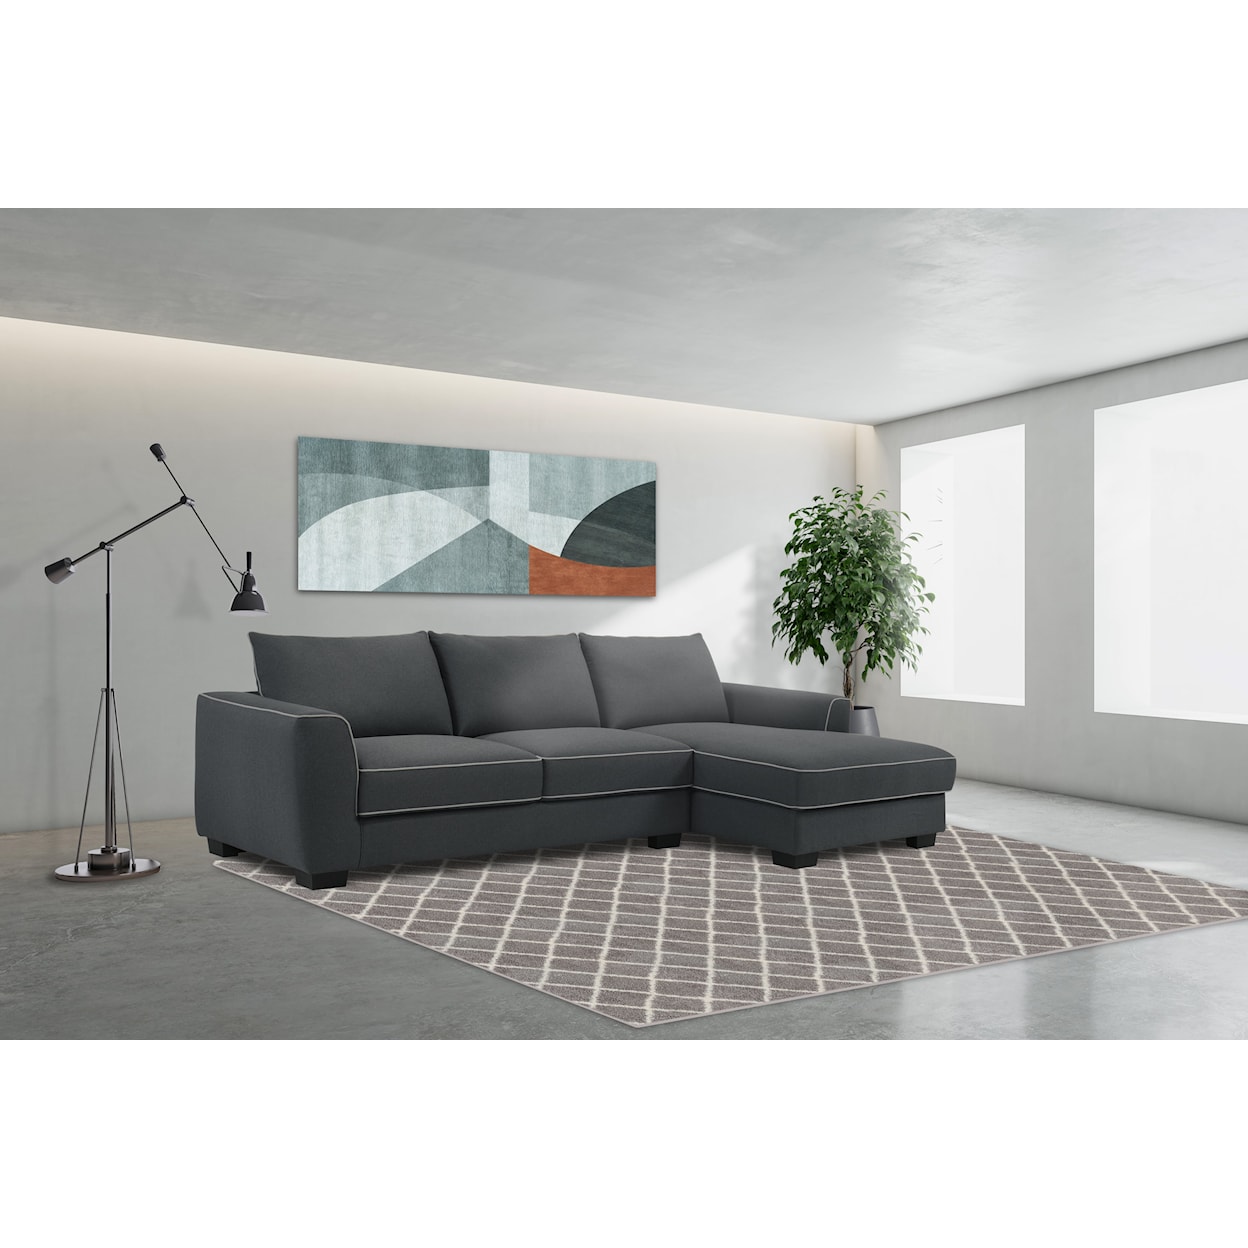 New Classic Portland Sectional Sofa Chaise